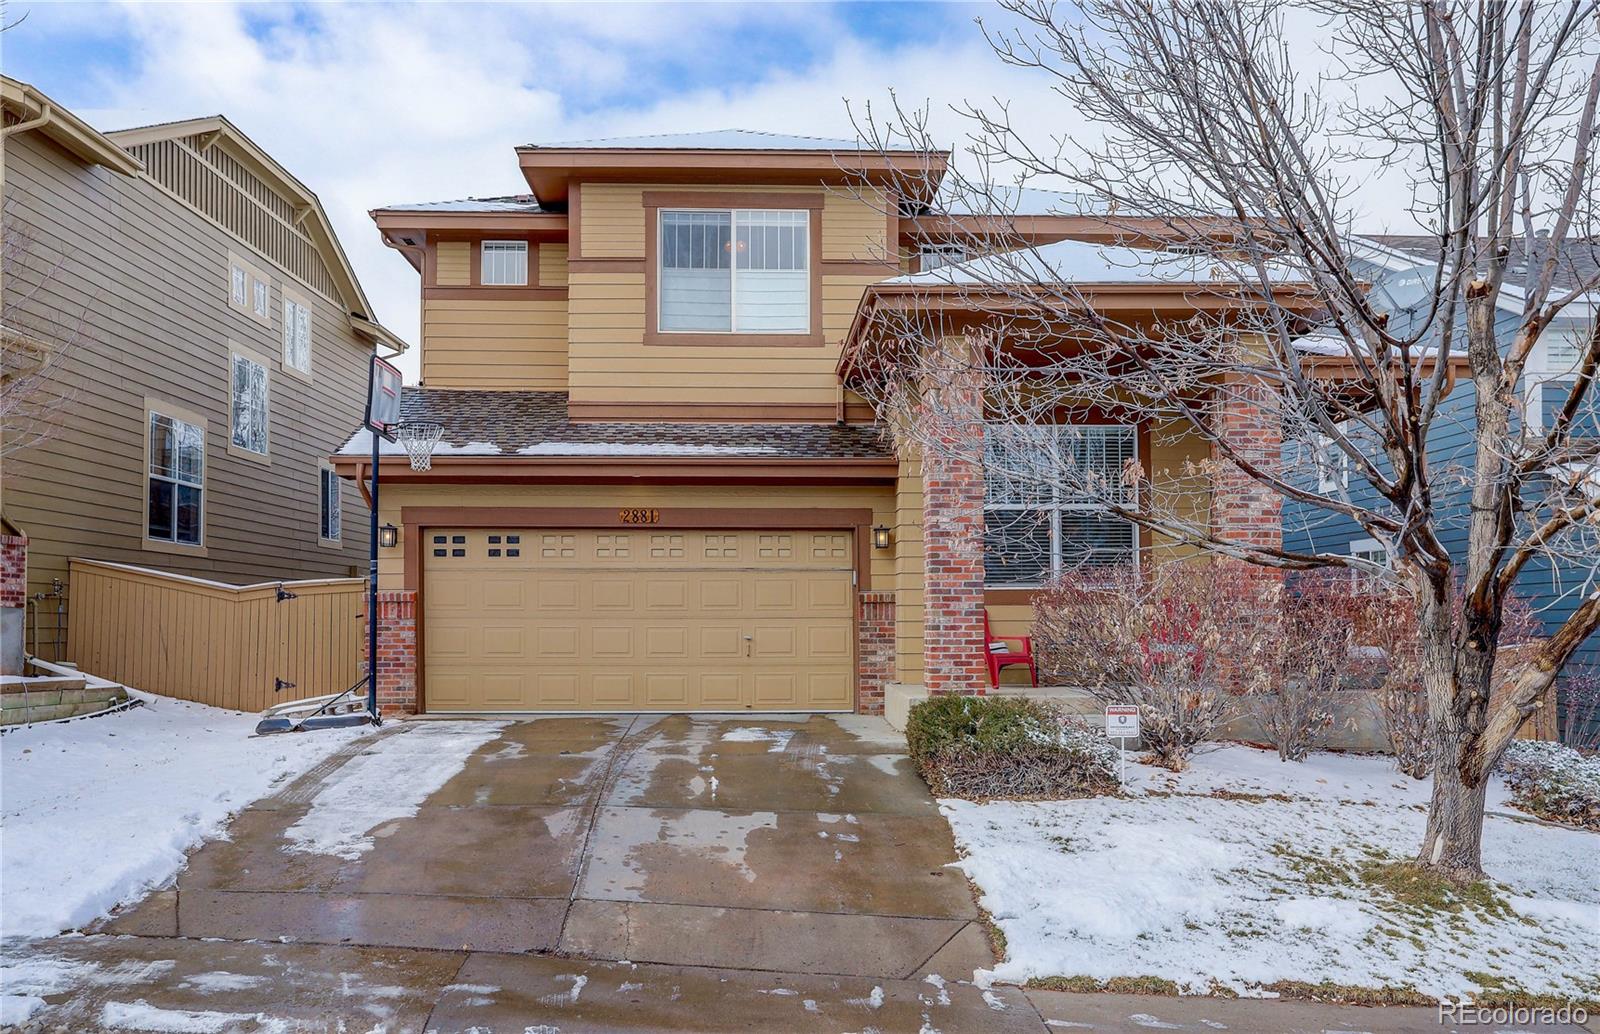 Report Image for 2881  Windridge Circle,Highlands Ranch, Colorado